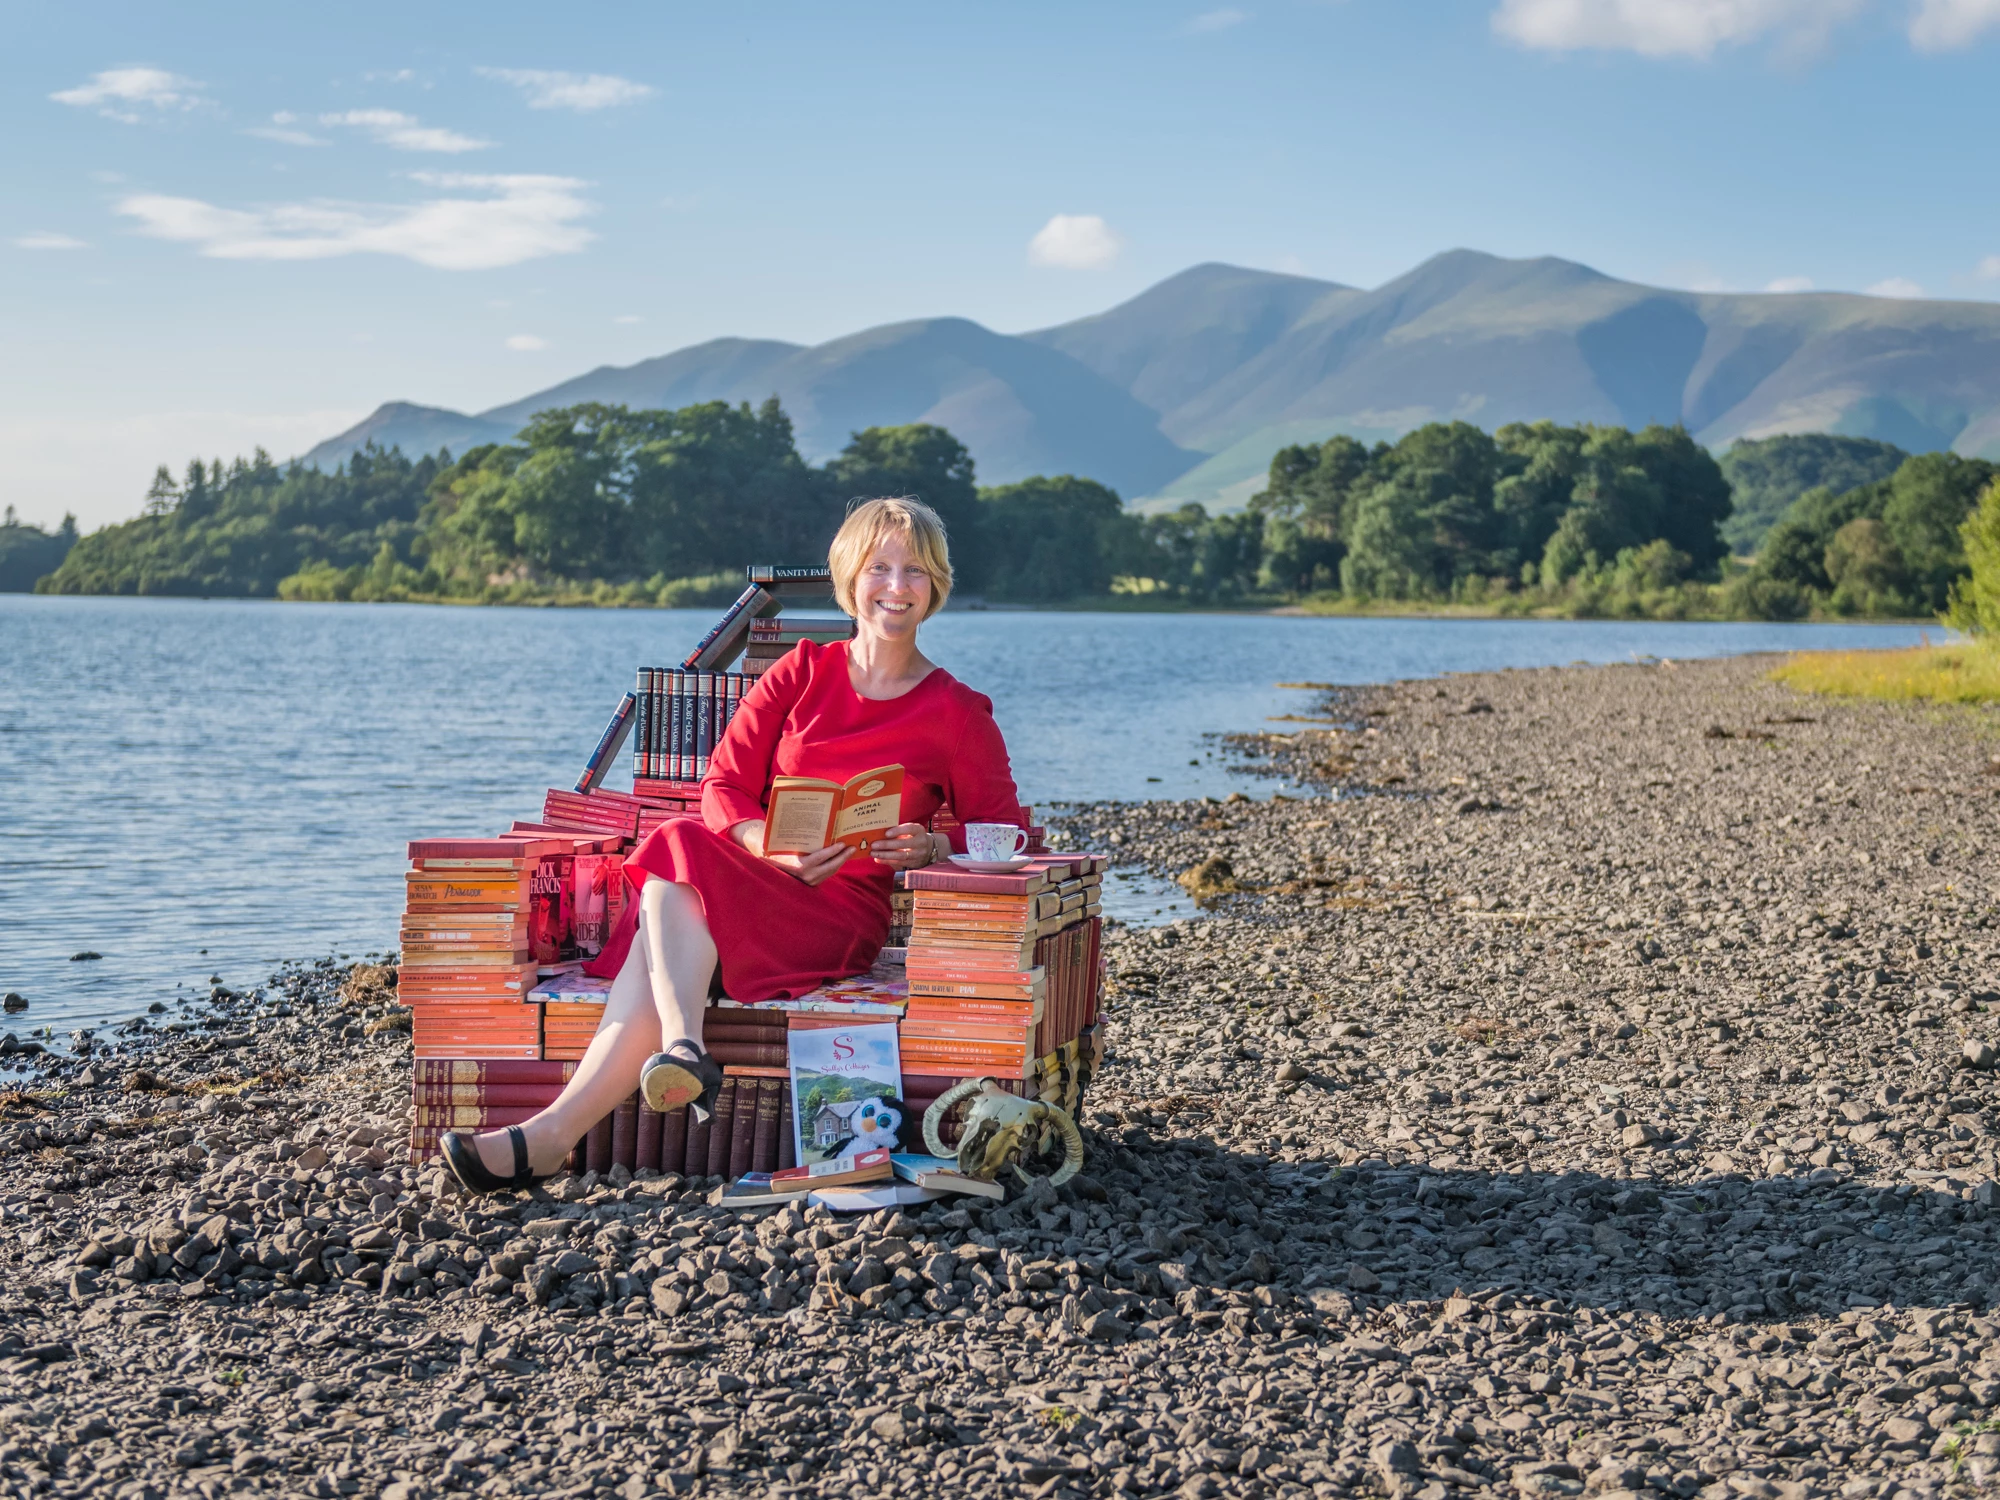 Sally Fielding, of Sally's Cottages, relaxes in a chair of books